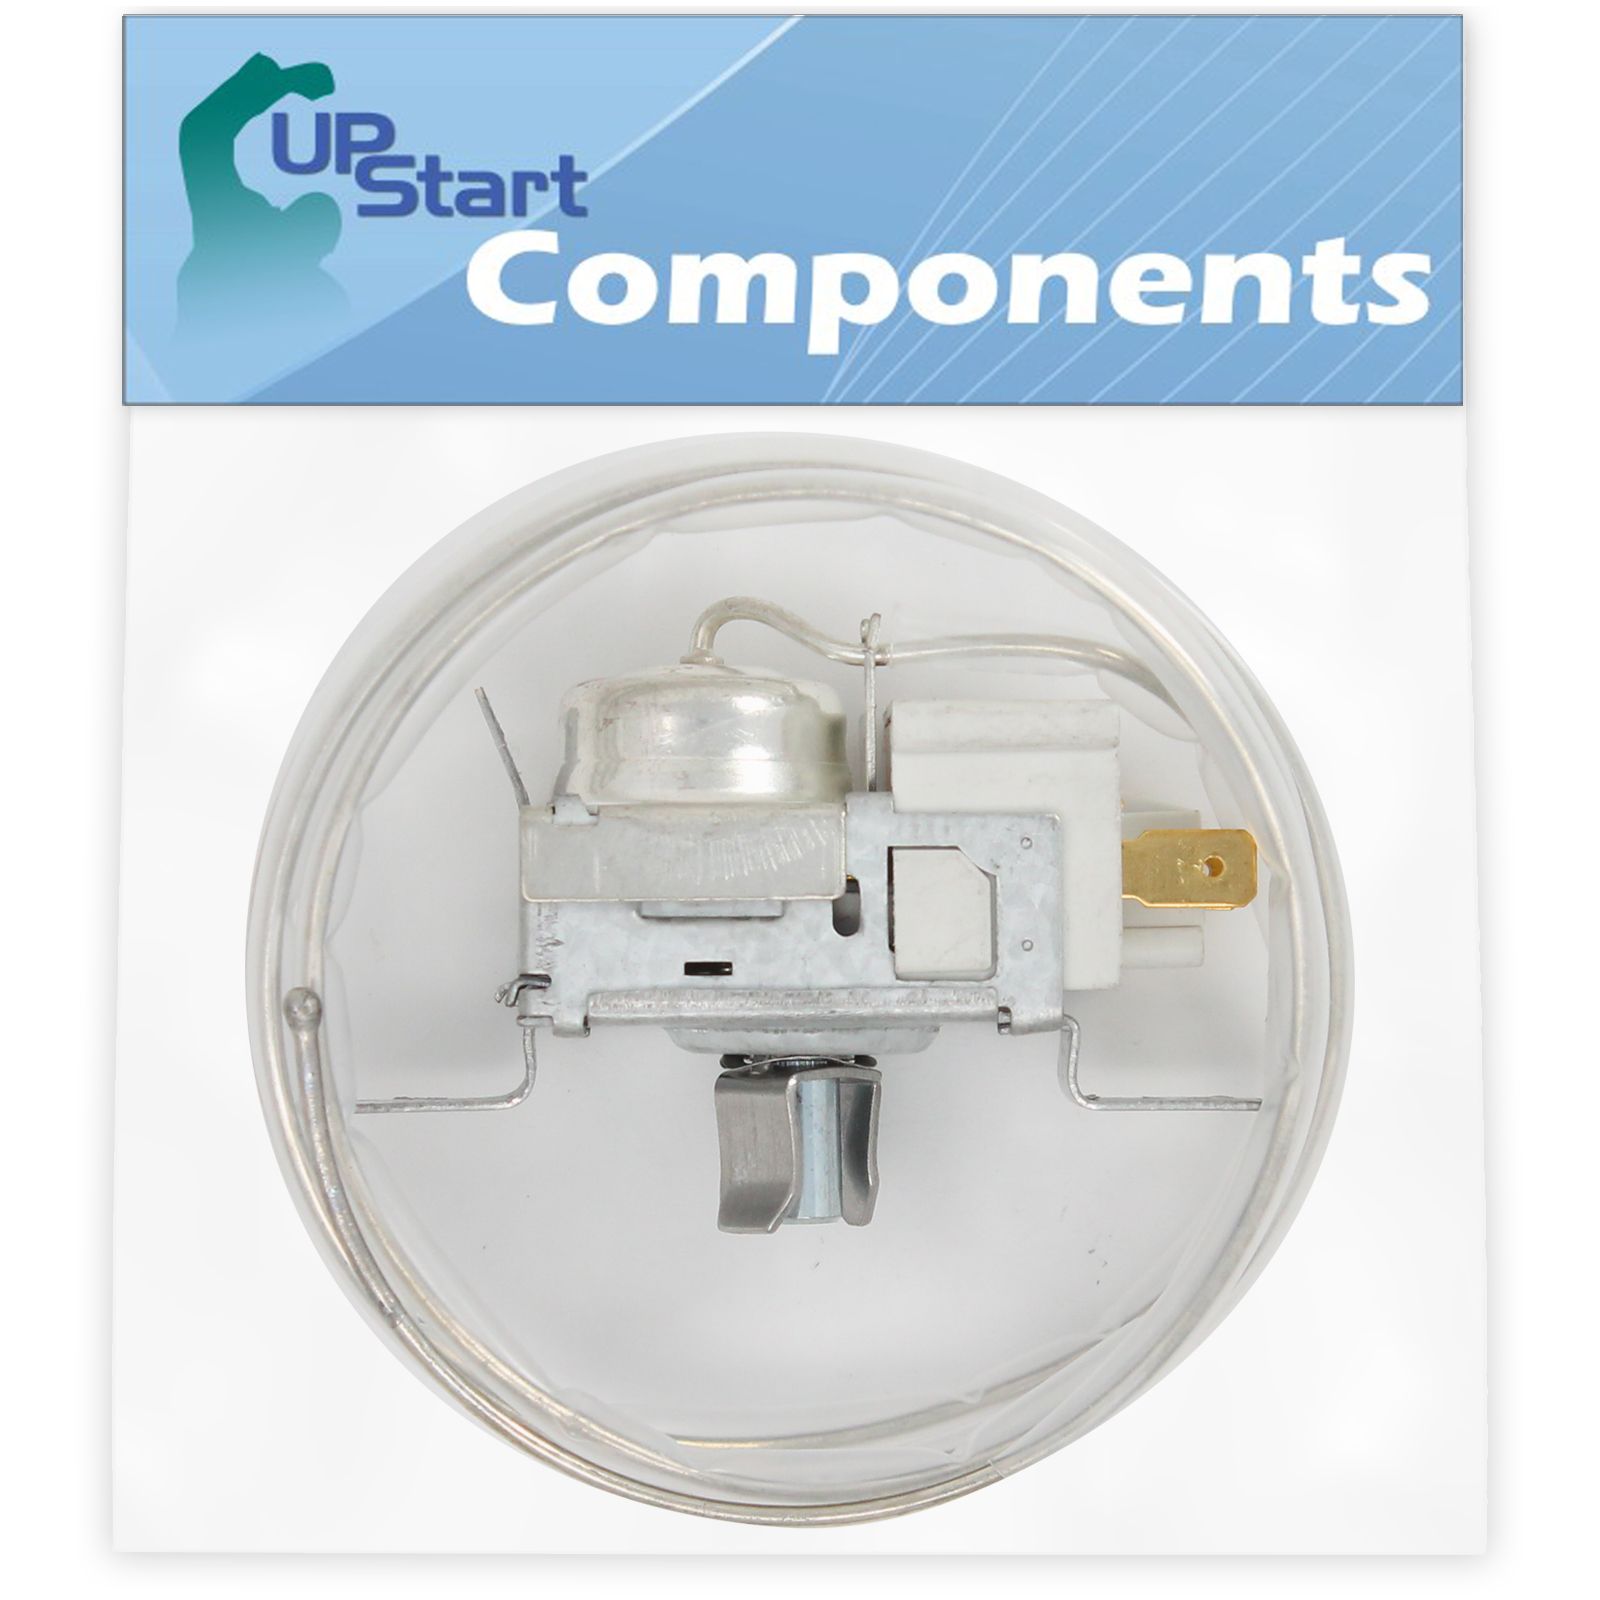 2198202 Cold Control Thermostat Replacement for Kenmore / Sears 10648262890 Refrigerator - Compatible with WP2198202 Refrigerator Temperature Control Thermostat - UpStart Components Brand - image 1 of 3